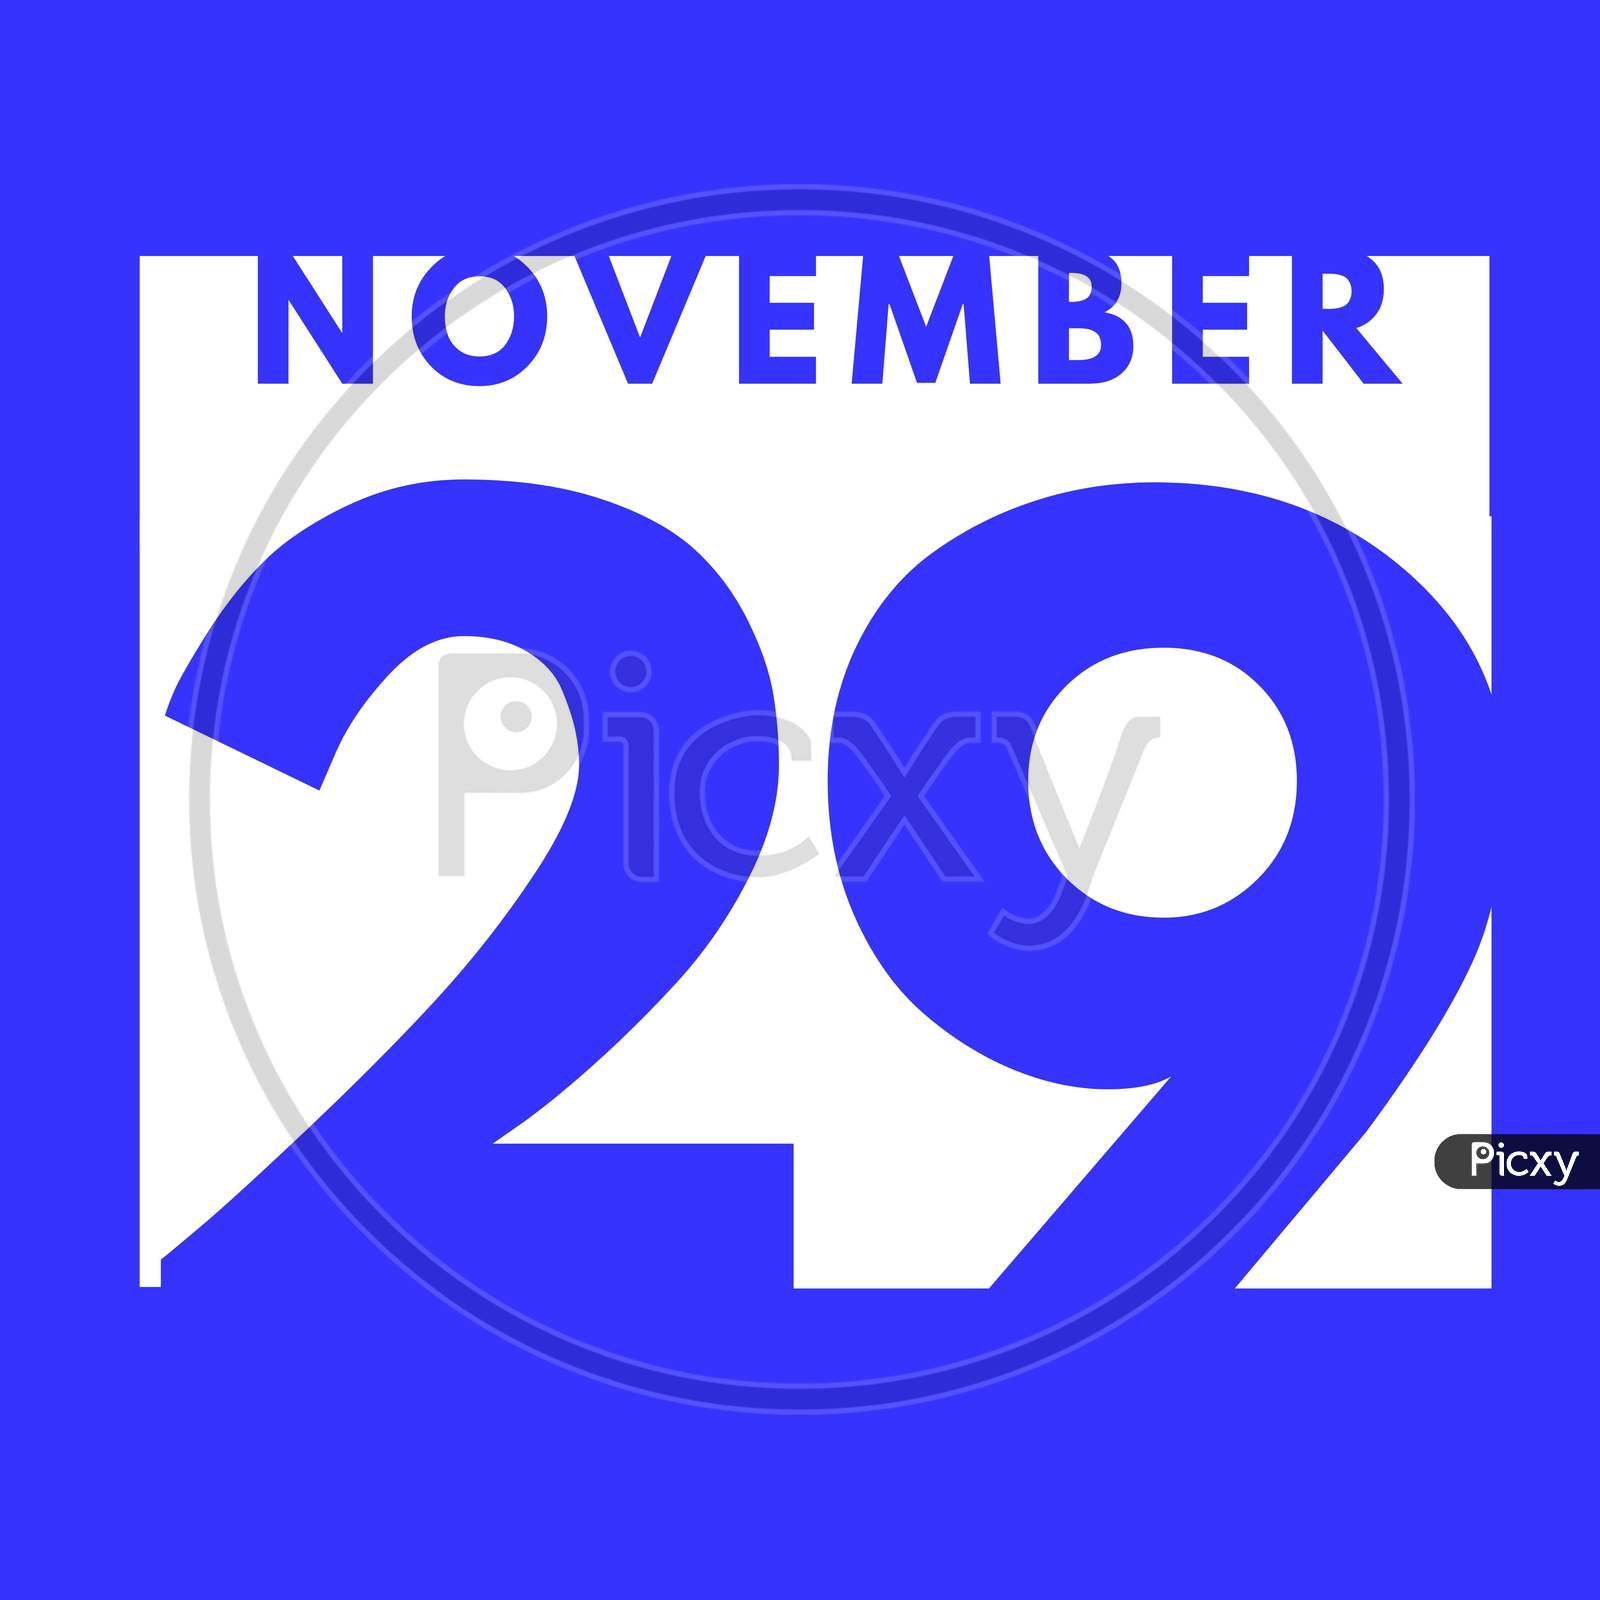 November 29 . Flat Modern Daily Calendar Icon .Date ,Day, Month .Calendar For The Month Of November